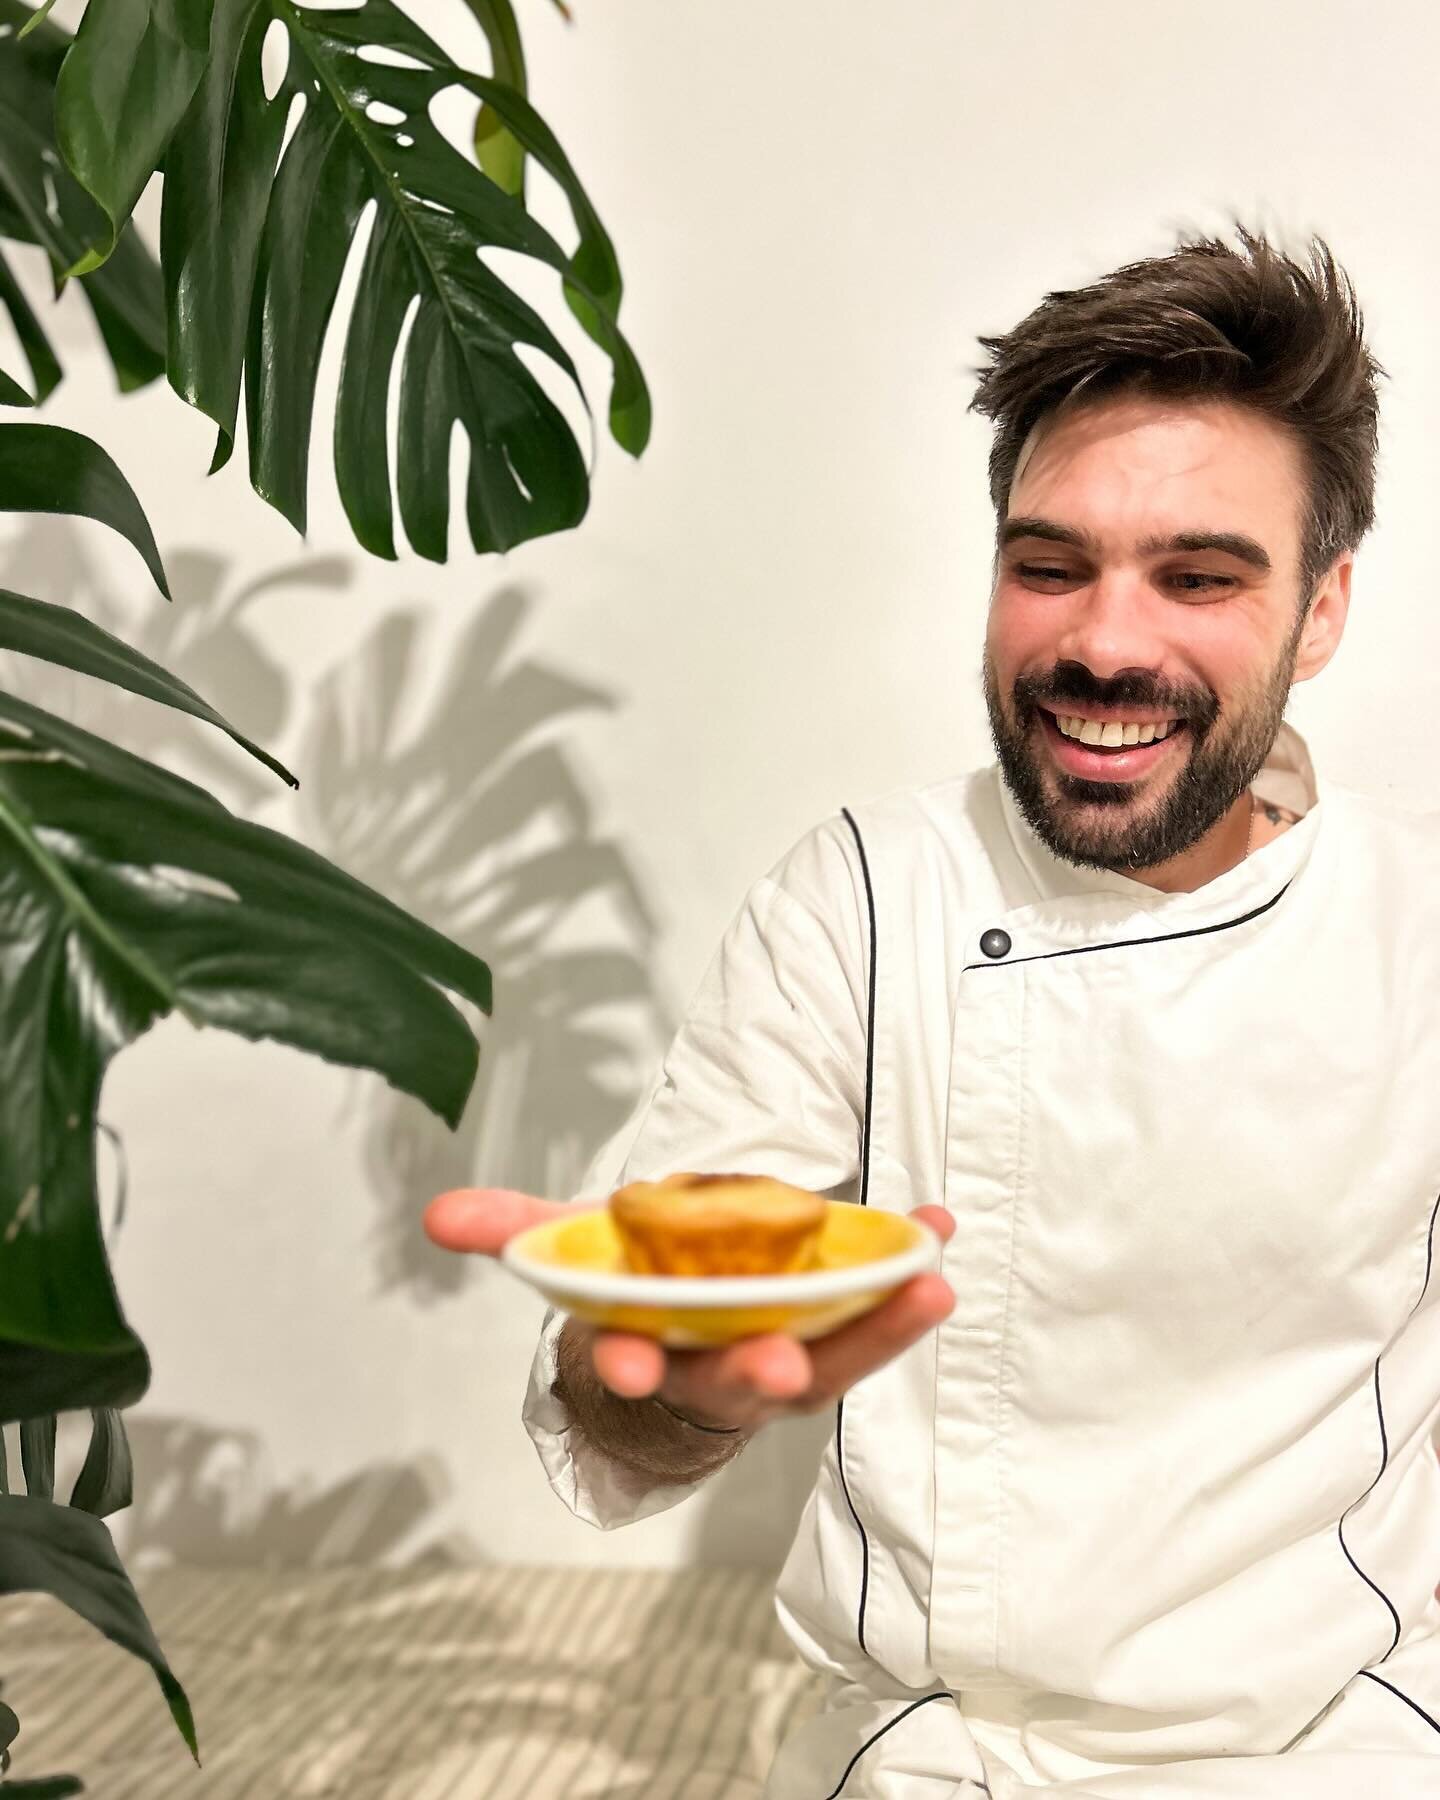 &bull;
Say Ol&aacute; to Francisco! 👨&zwj;🍳
&bull;
You probably never see him, but you probably taste very often the food he makes backstage 😋
&bull;
Francisco is since three months with us and he pairs perfectly with the team as a kind and caring